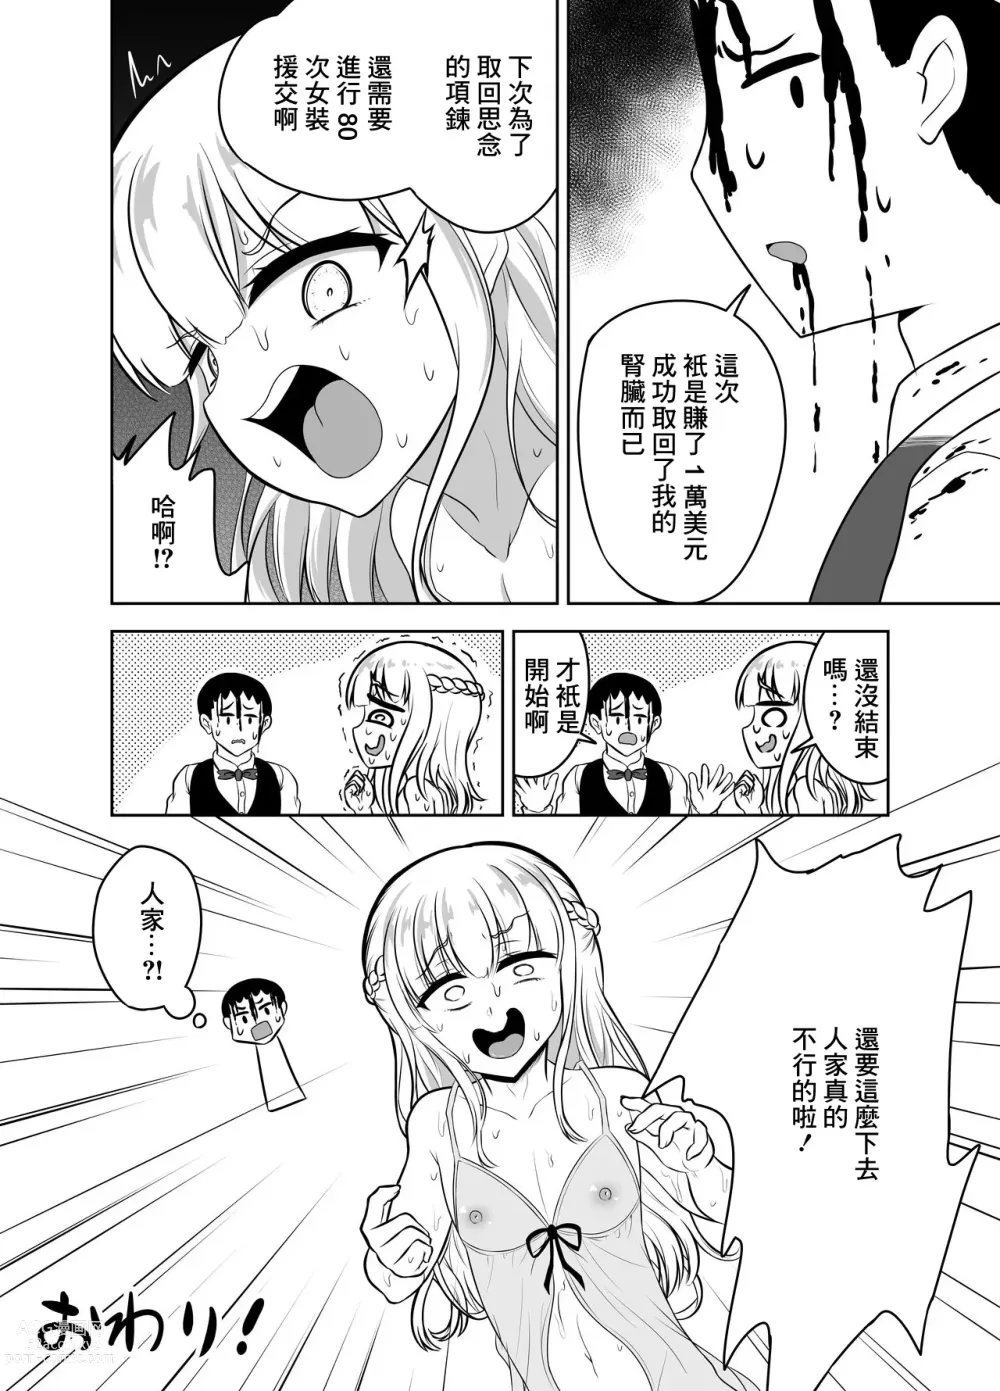 Page 24 of doujinshi Noble Asshole